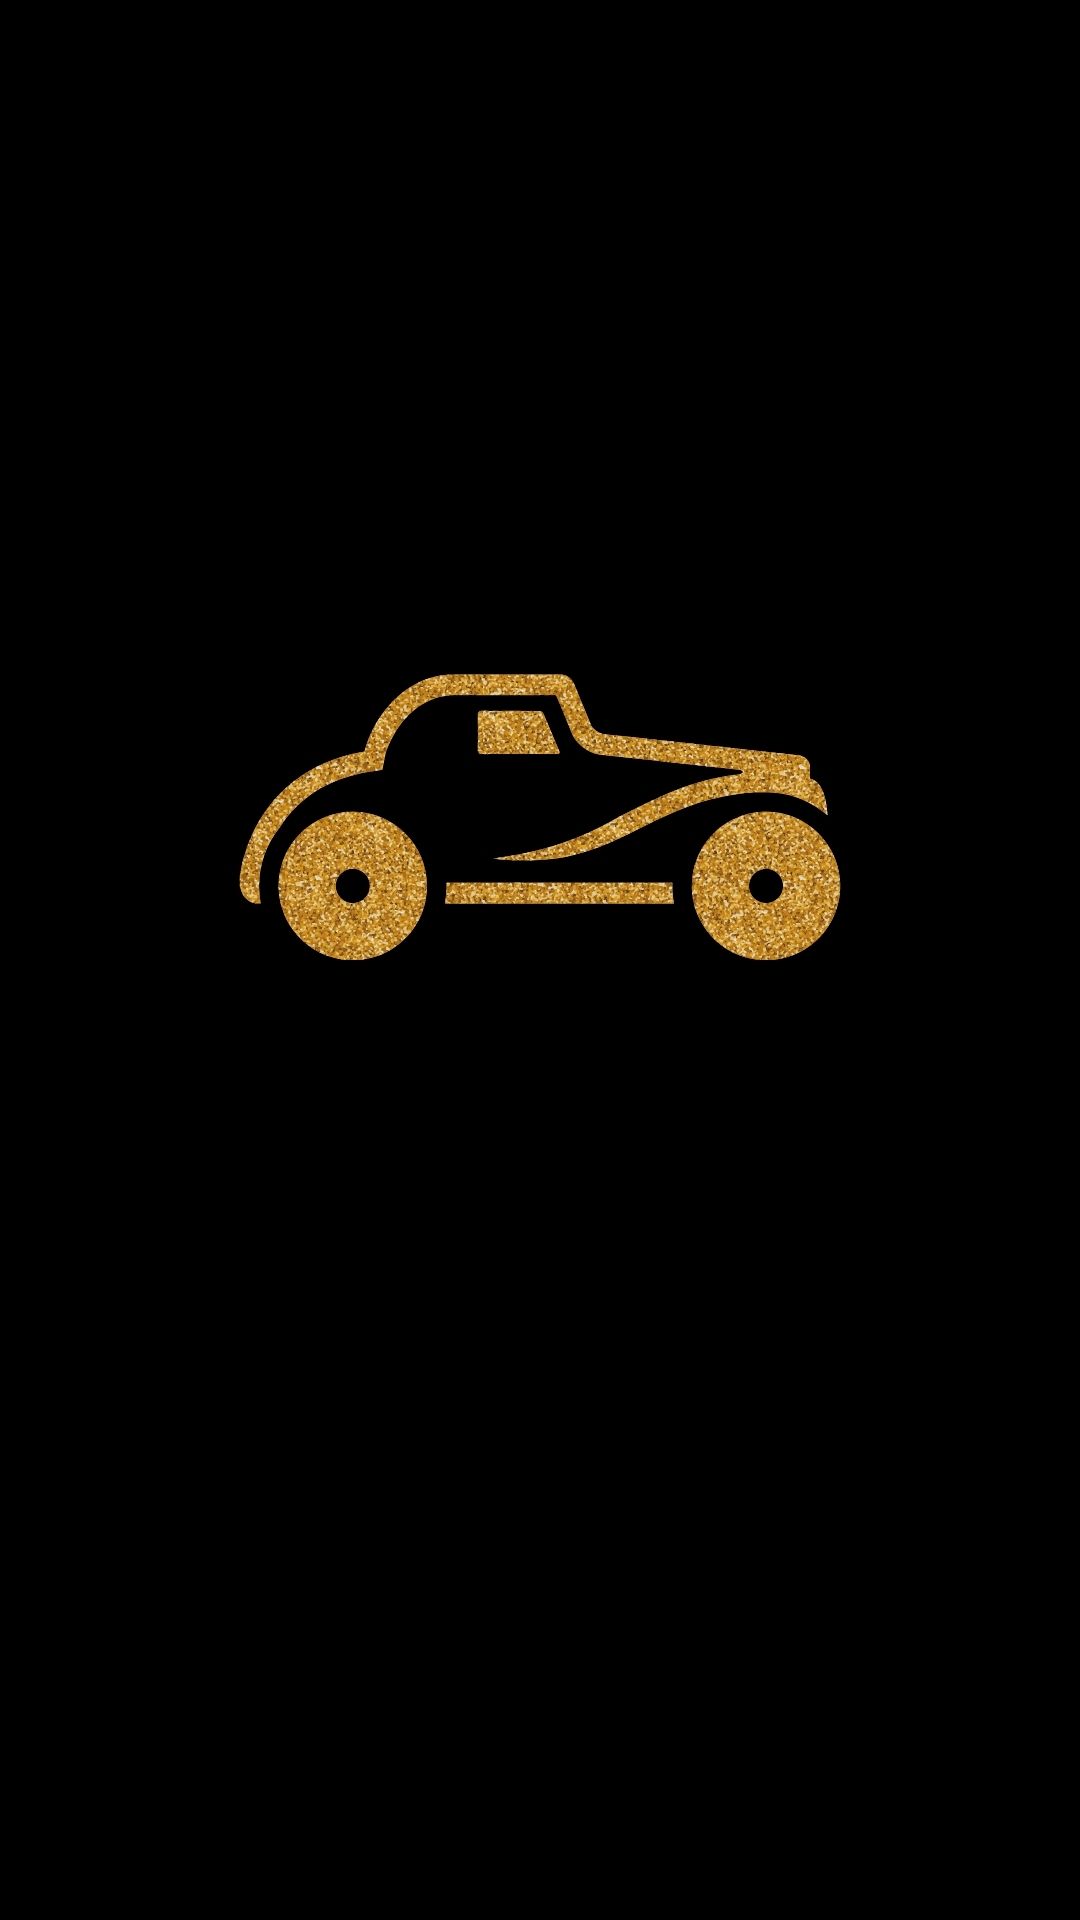 Gold And Black Wallpaper  Designs For Phone